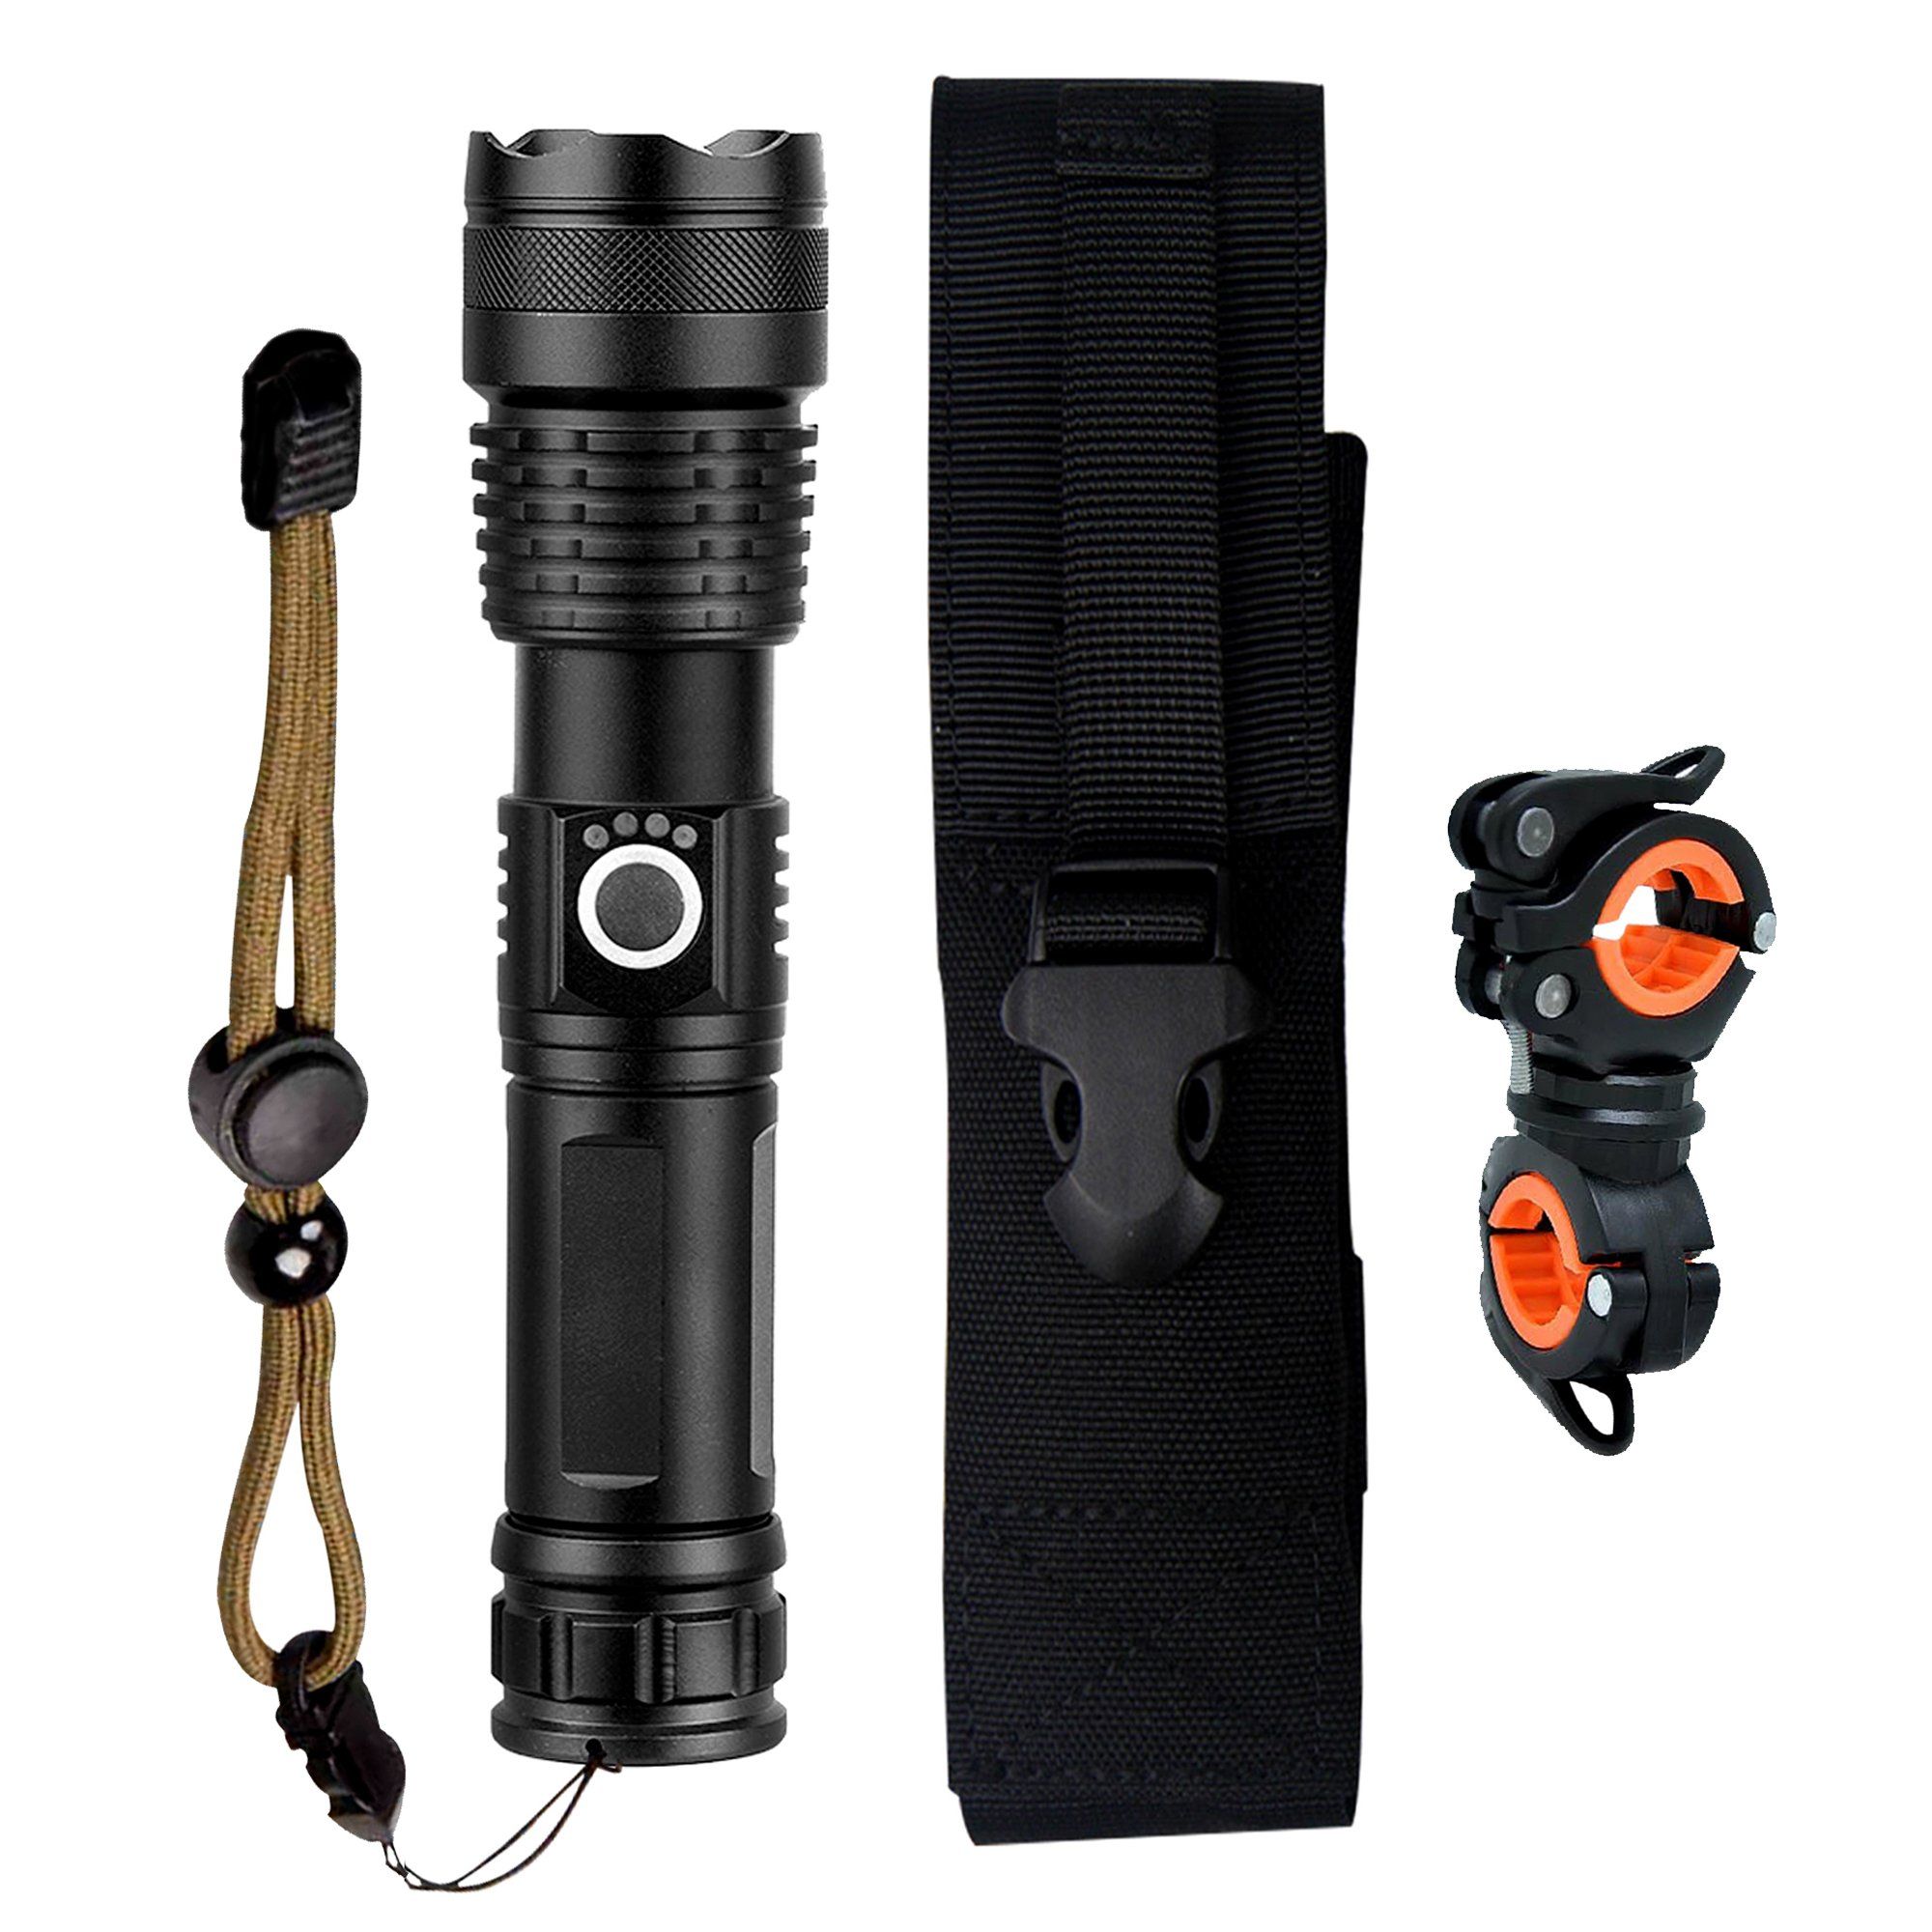 Rechargeable Zooming Flashlight Torch With Bicycle Mount